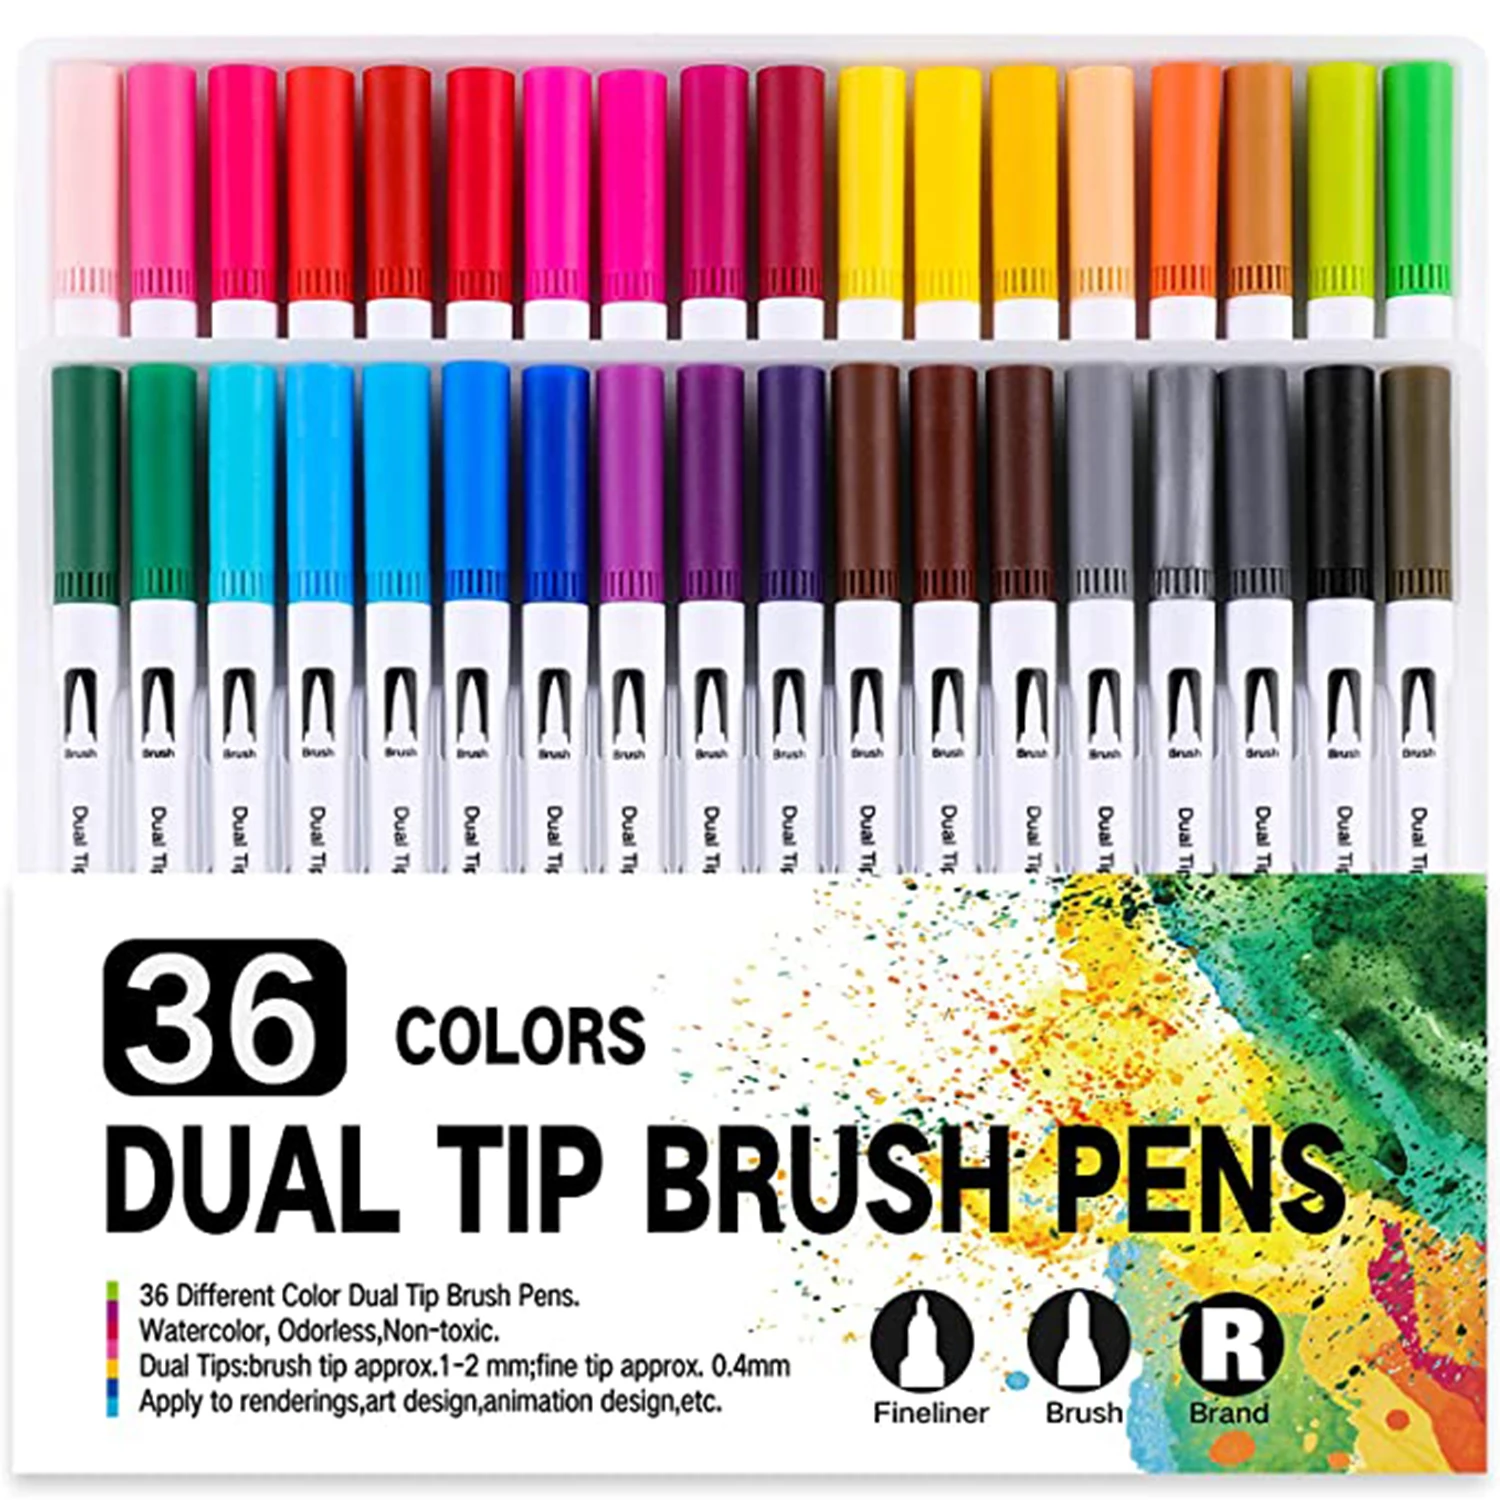 

36 Colors Dual Brush Pens 0.4mm Art Marker Brush & Fine Tip Art Coloring Markers for Kids Adult Coloring Book Art Supplies